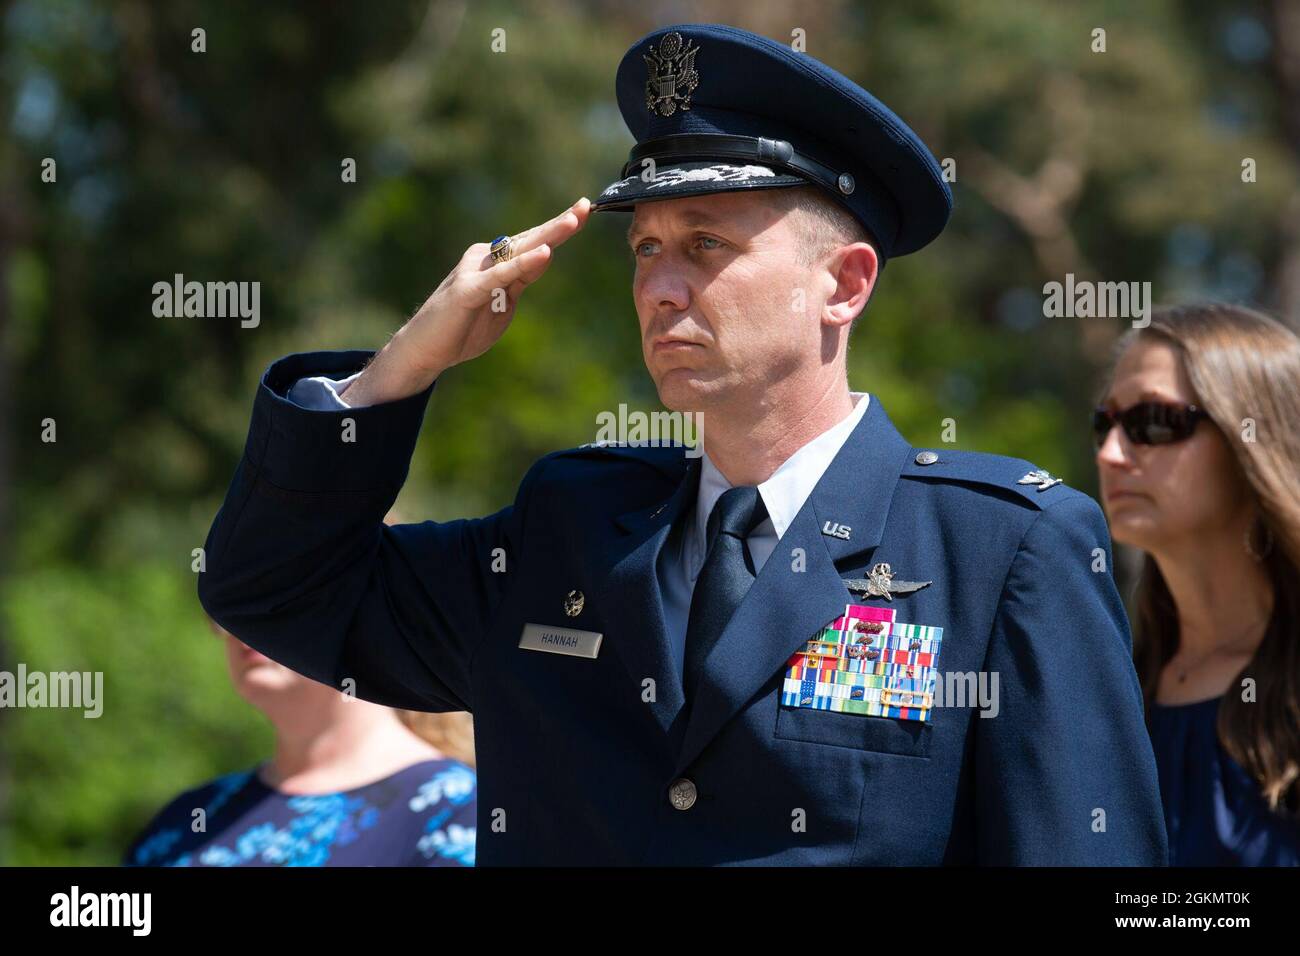 U.S. Air Force Col. Jon Hannah, 422nd Air Base Group commander, salutes at a 2021 Memorial Day ceremony at the Brookwood American Military Cemetery, England, May 30, 2021. Memorial Day is one of our Nation's most solemn occasions. It serves as a chance to pause, reflect, and honor the women and men who gave the last full measure defending our Nation and our democratic ideals. Stock Photo